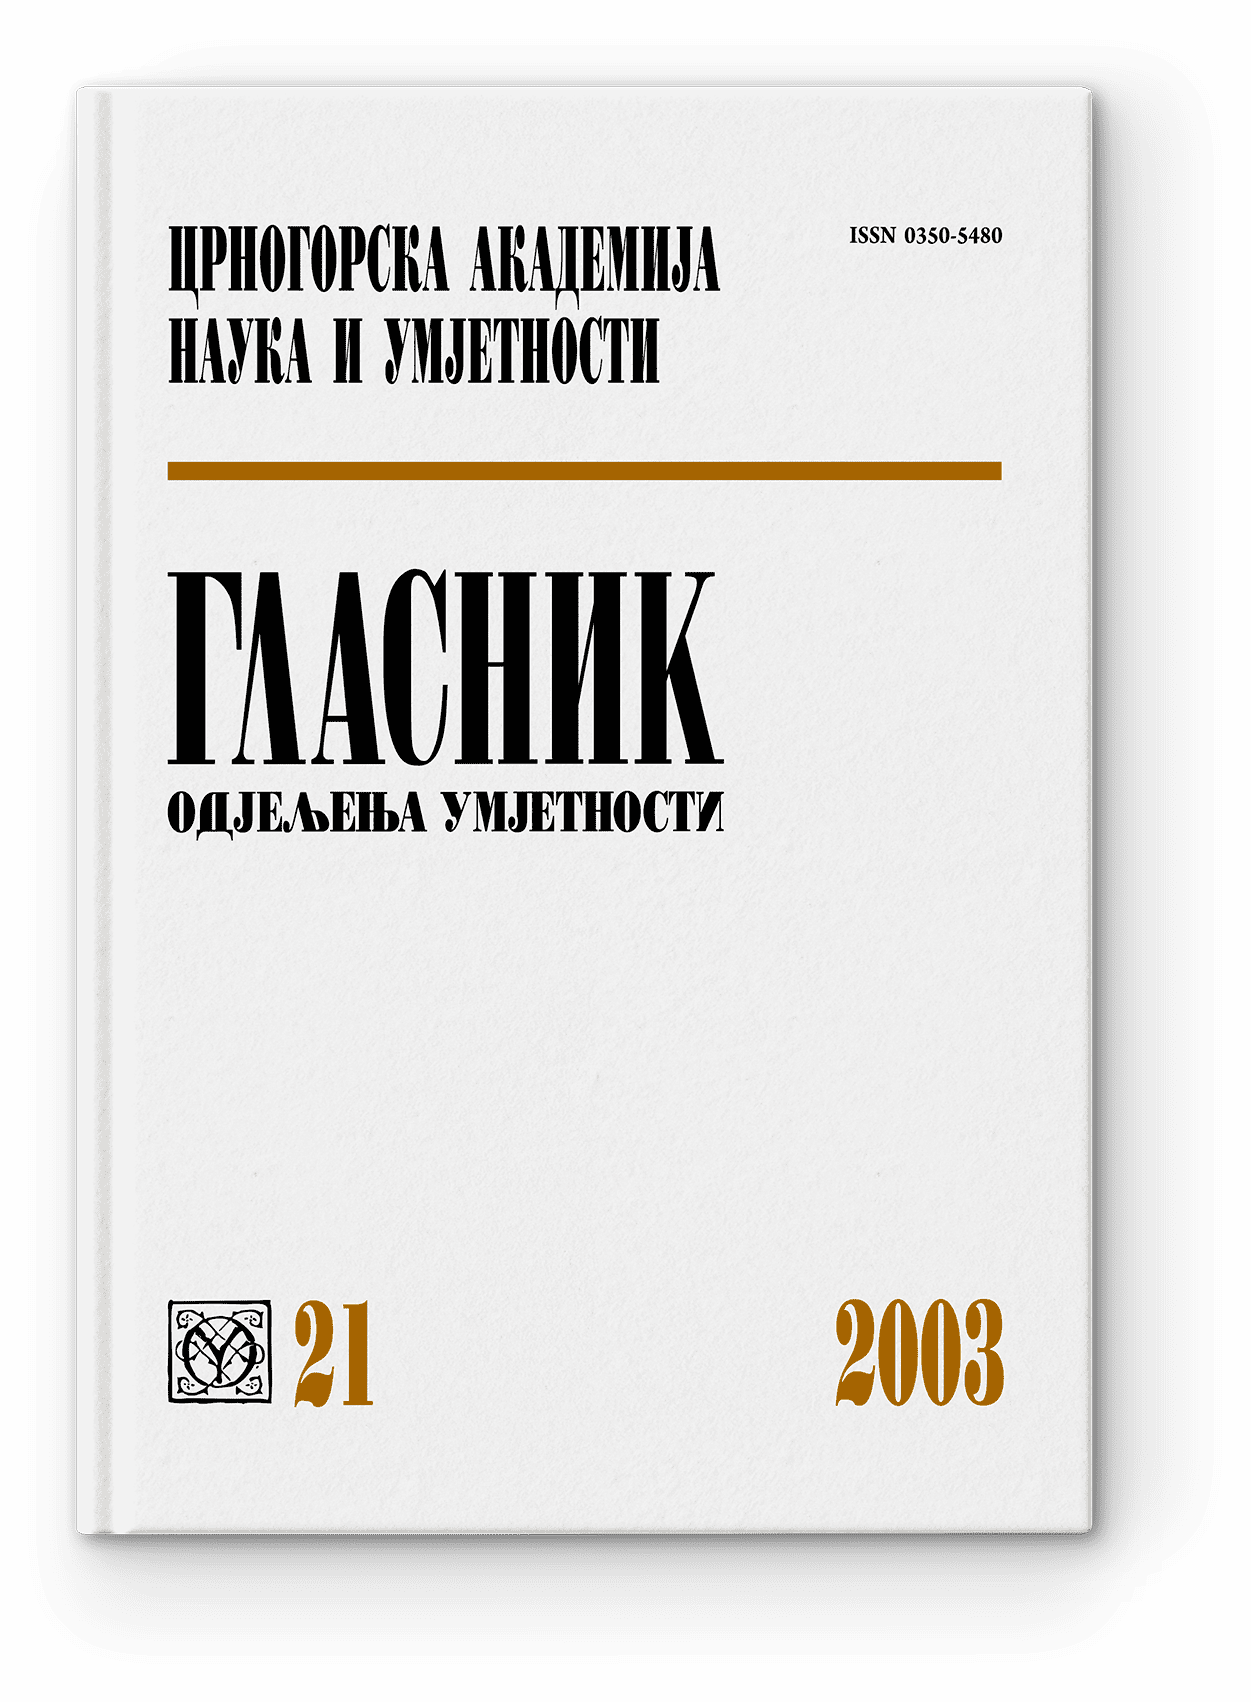 Proceedings of the Department of Arts, 21/2003